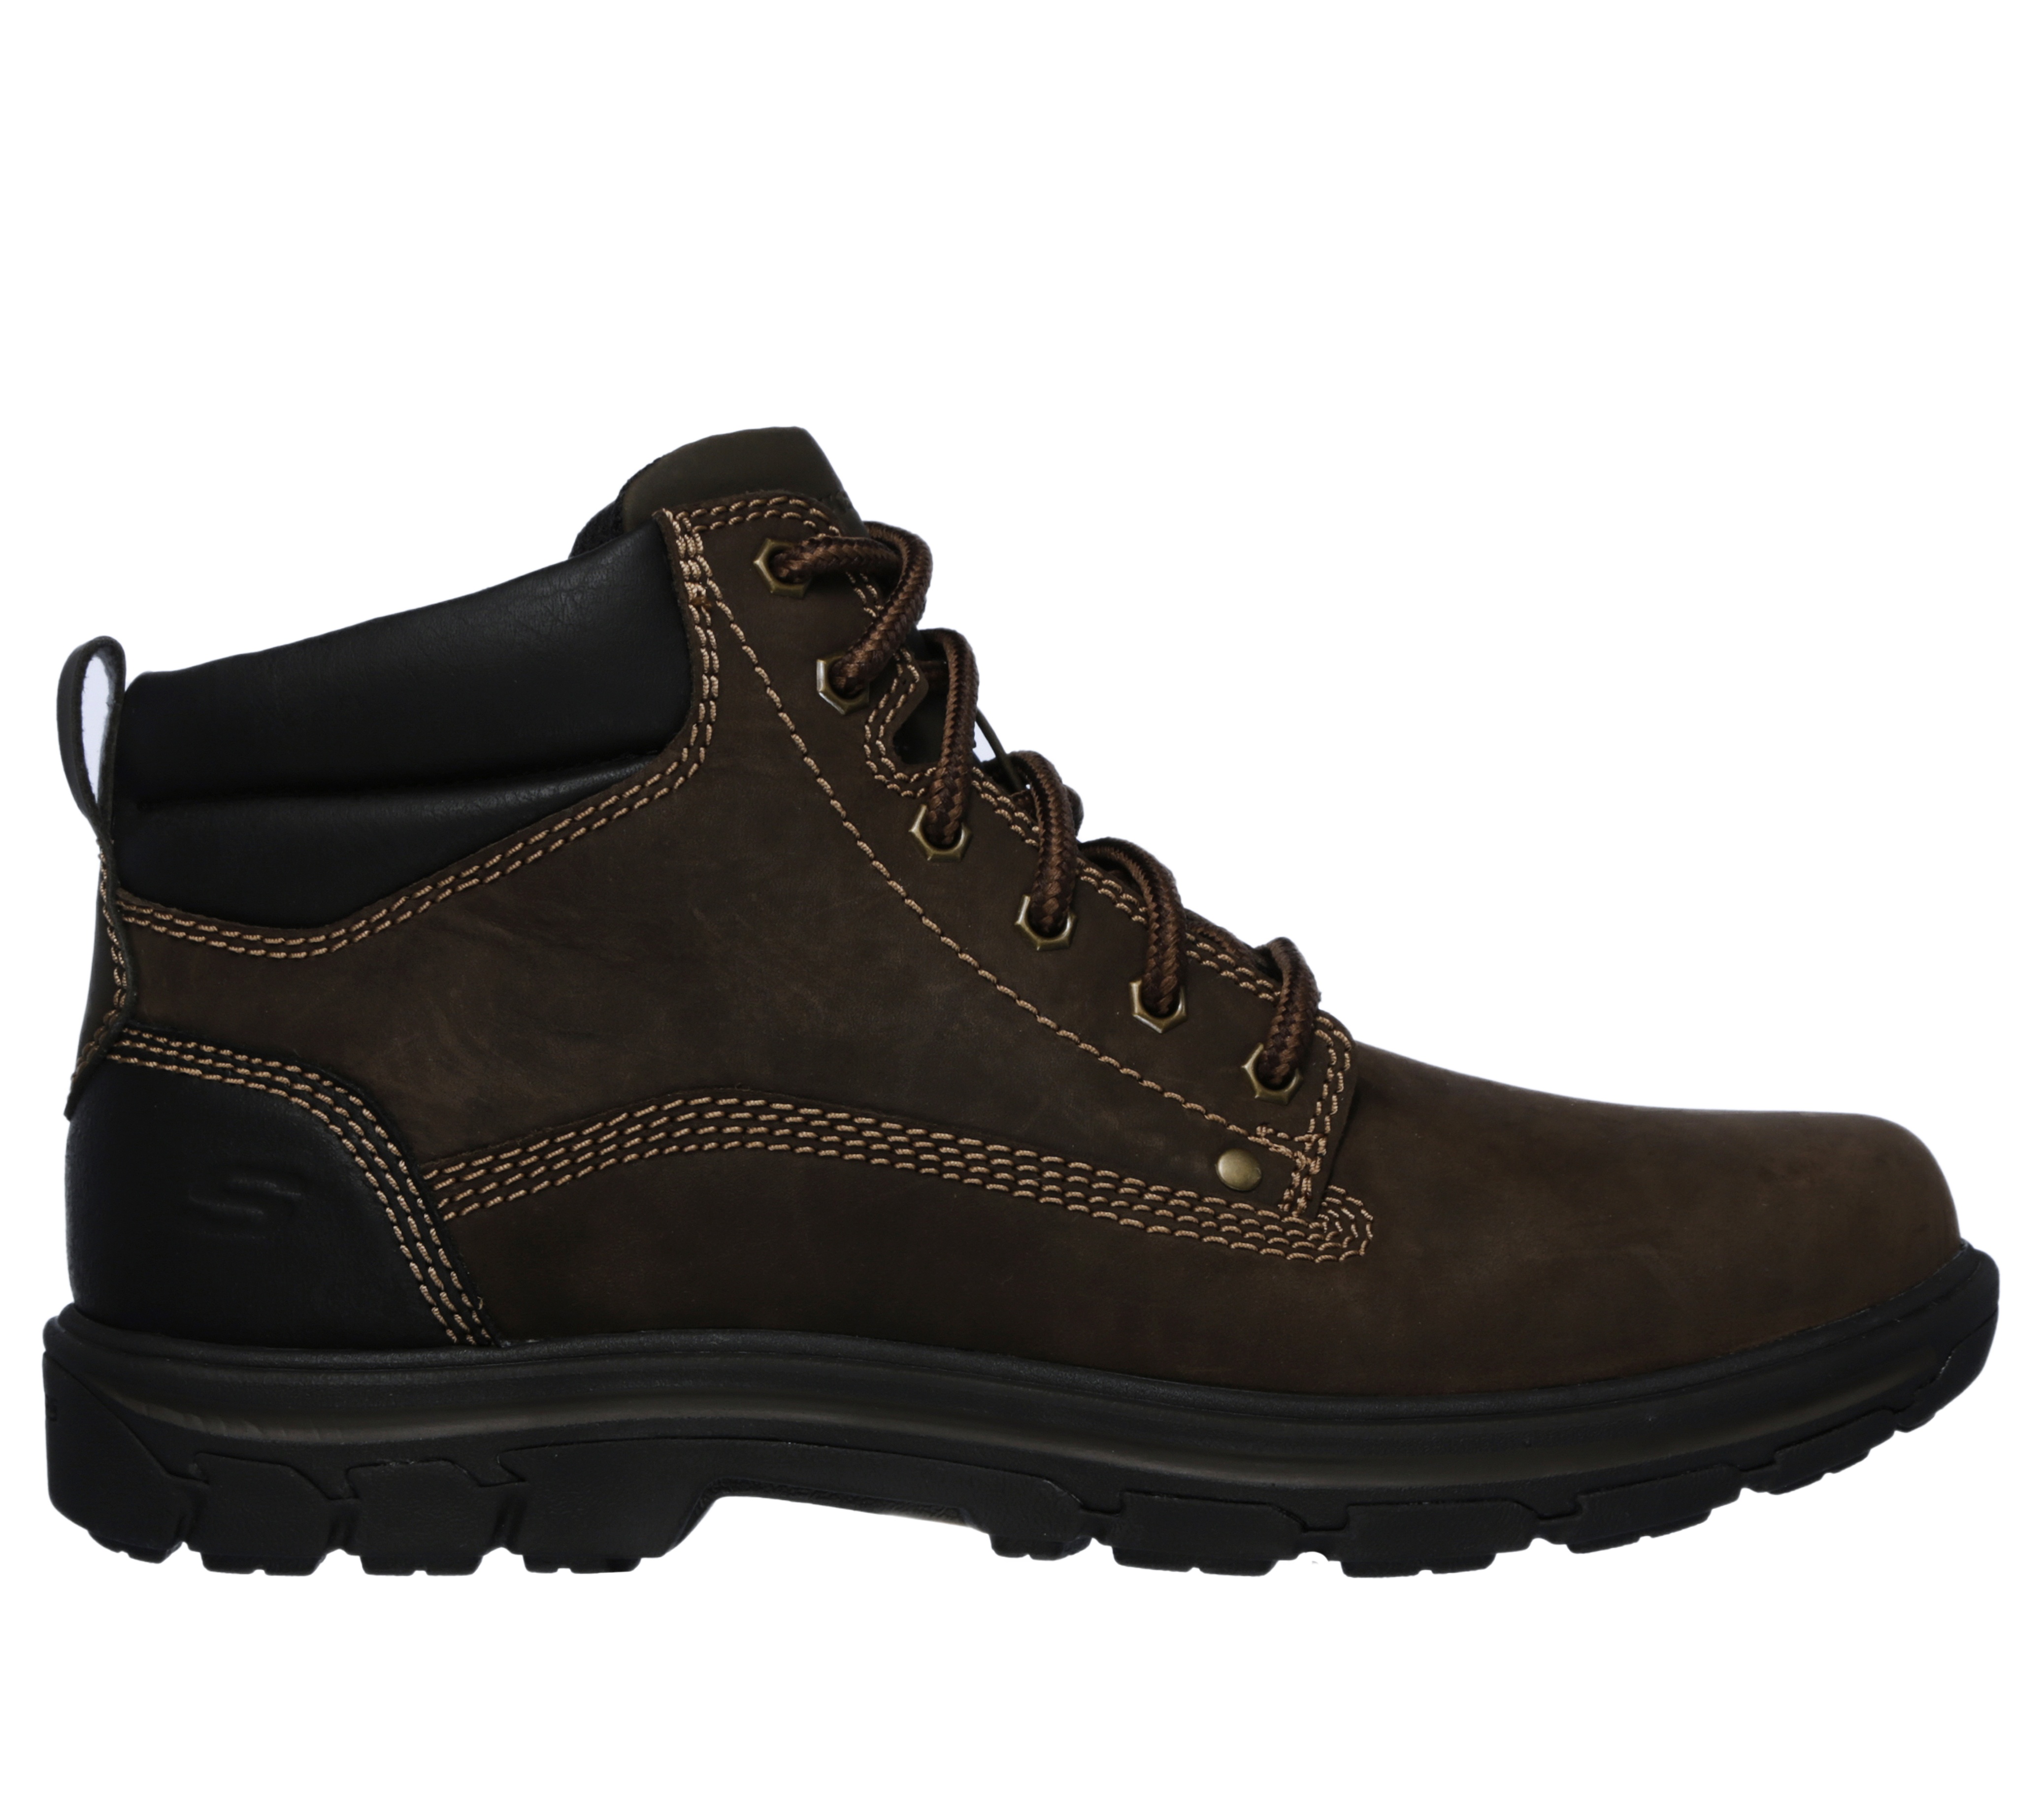 mens skechers boots with memory foam